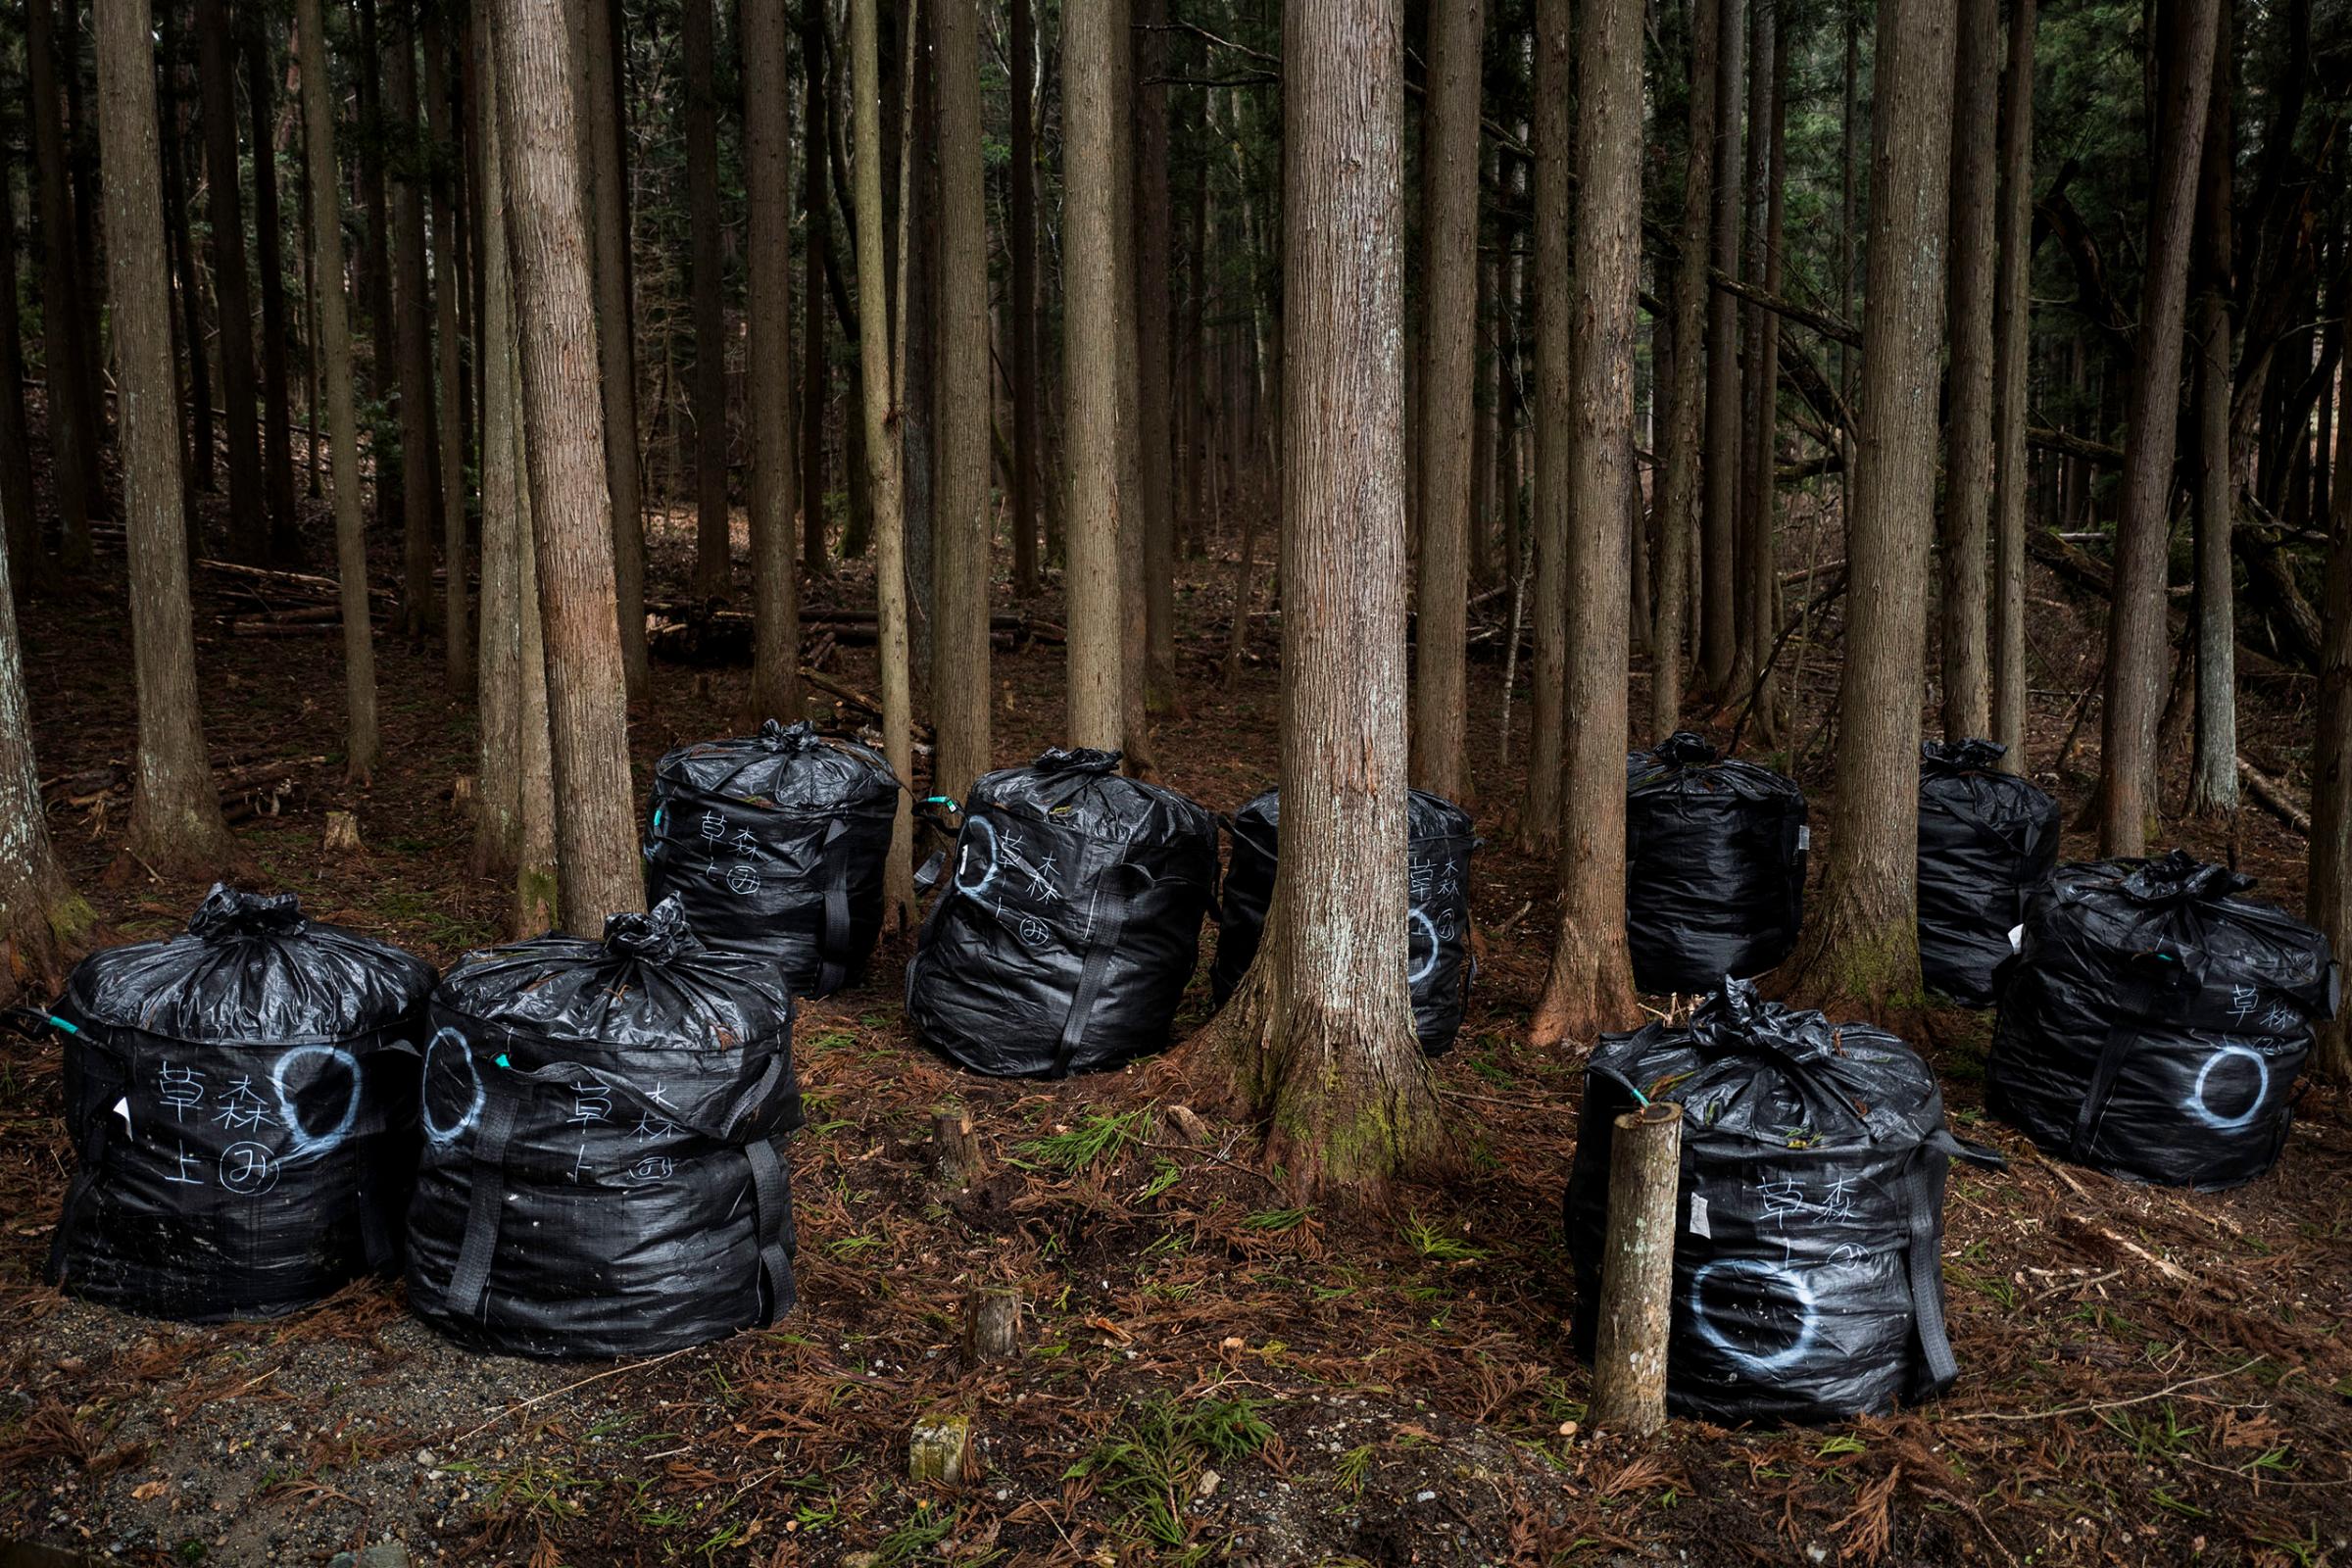 Decontamination bags are seen in the woods of Itate, Fukushima, Japan, March 7, 2016.